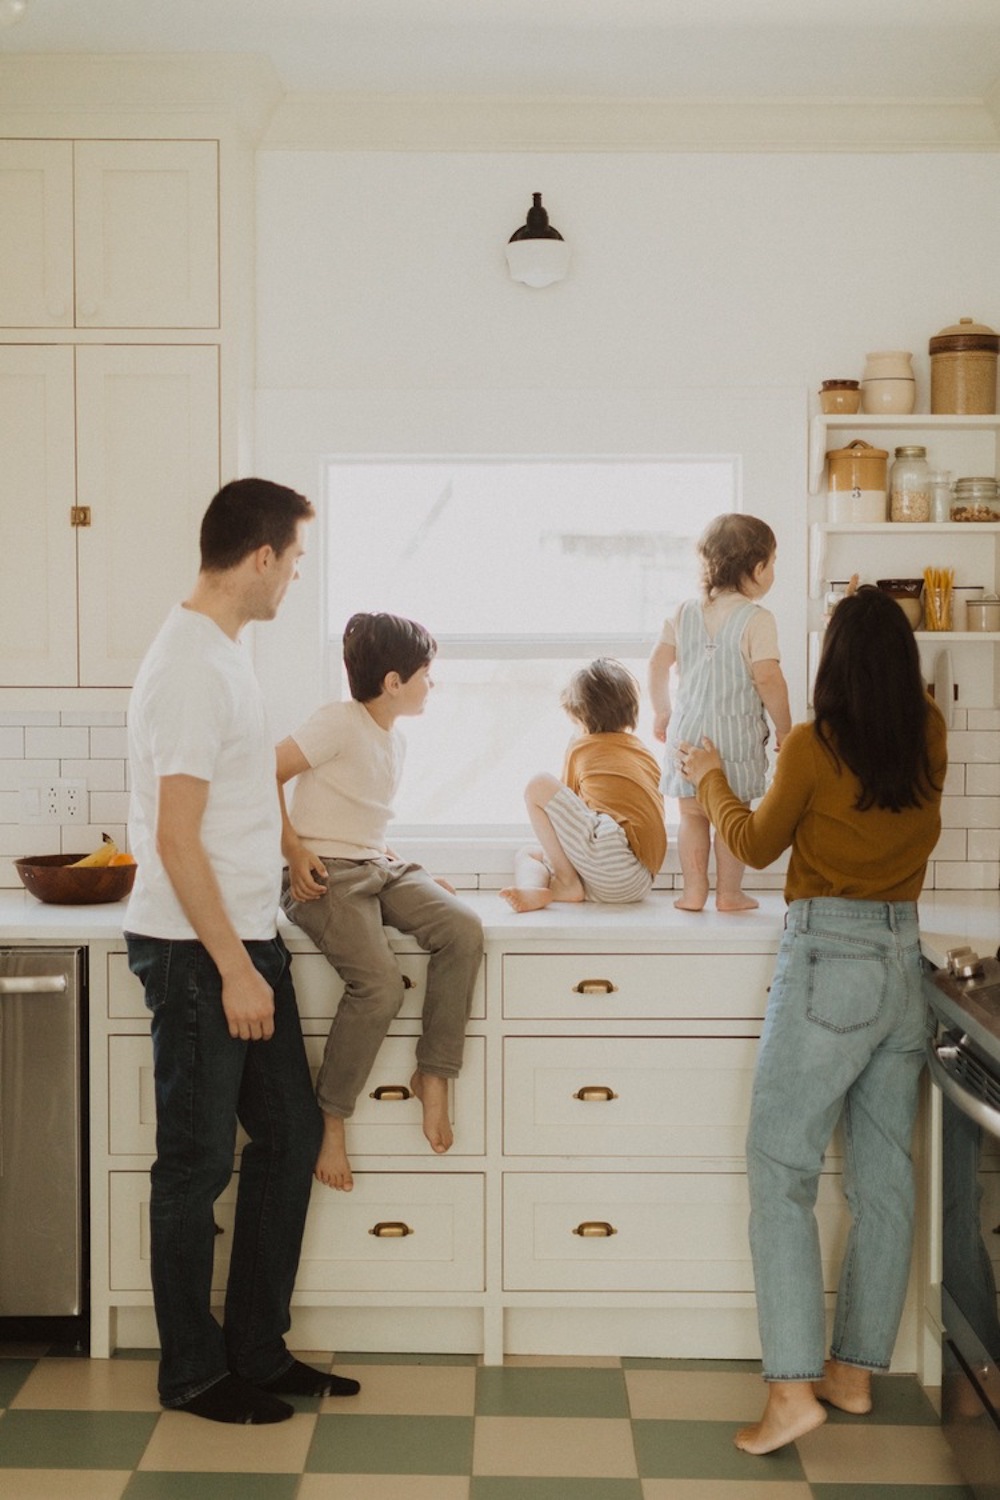 image of a family of five in a white kitchen looking out the window wearing jeans and casual neutral tops